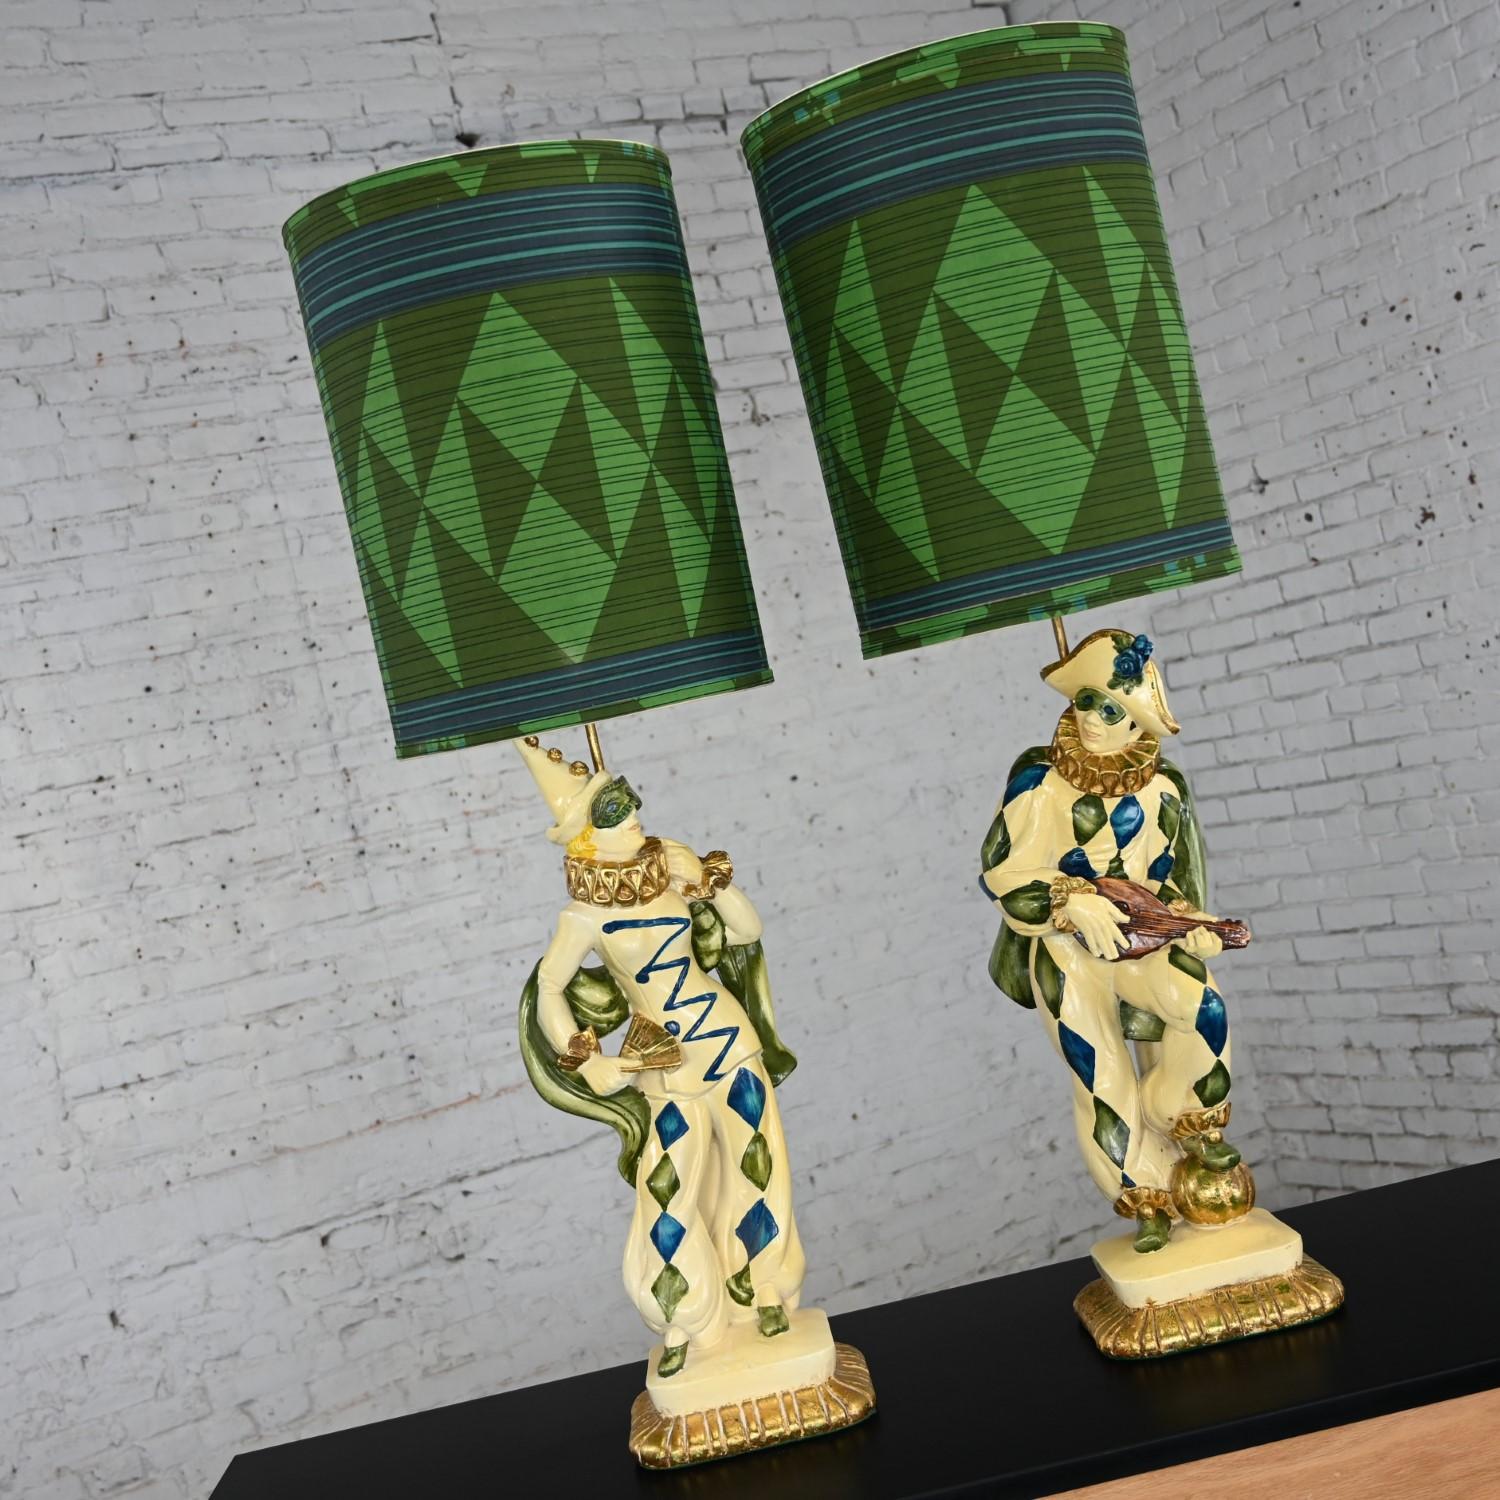 Joyful vintage MCM (Mid-Century Modern) Art Deco figural jester or harlequin table lamps in the style of Marbro, a pair. Comprised of molded plaster, blue, green, and gold hand painted details, antiqued gold painted stems, brass plated steel